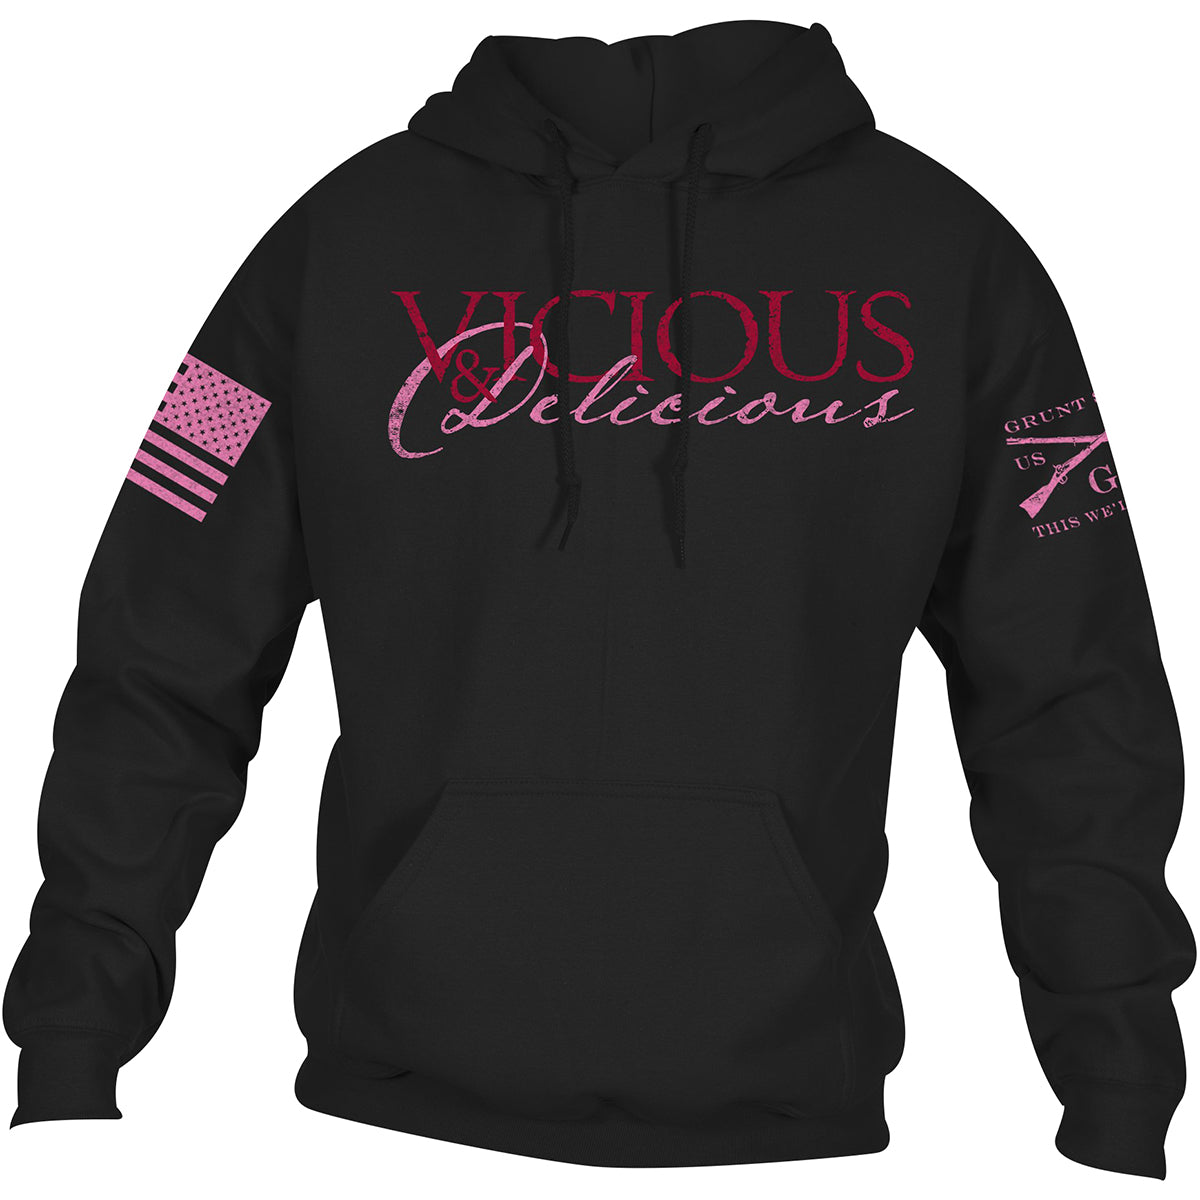 Grunt Style Vicious & Delicious Pullover Hoodie - Black Grunt Style